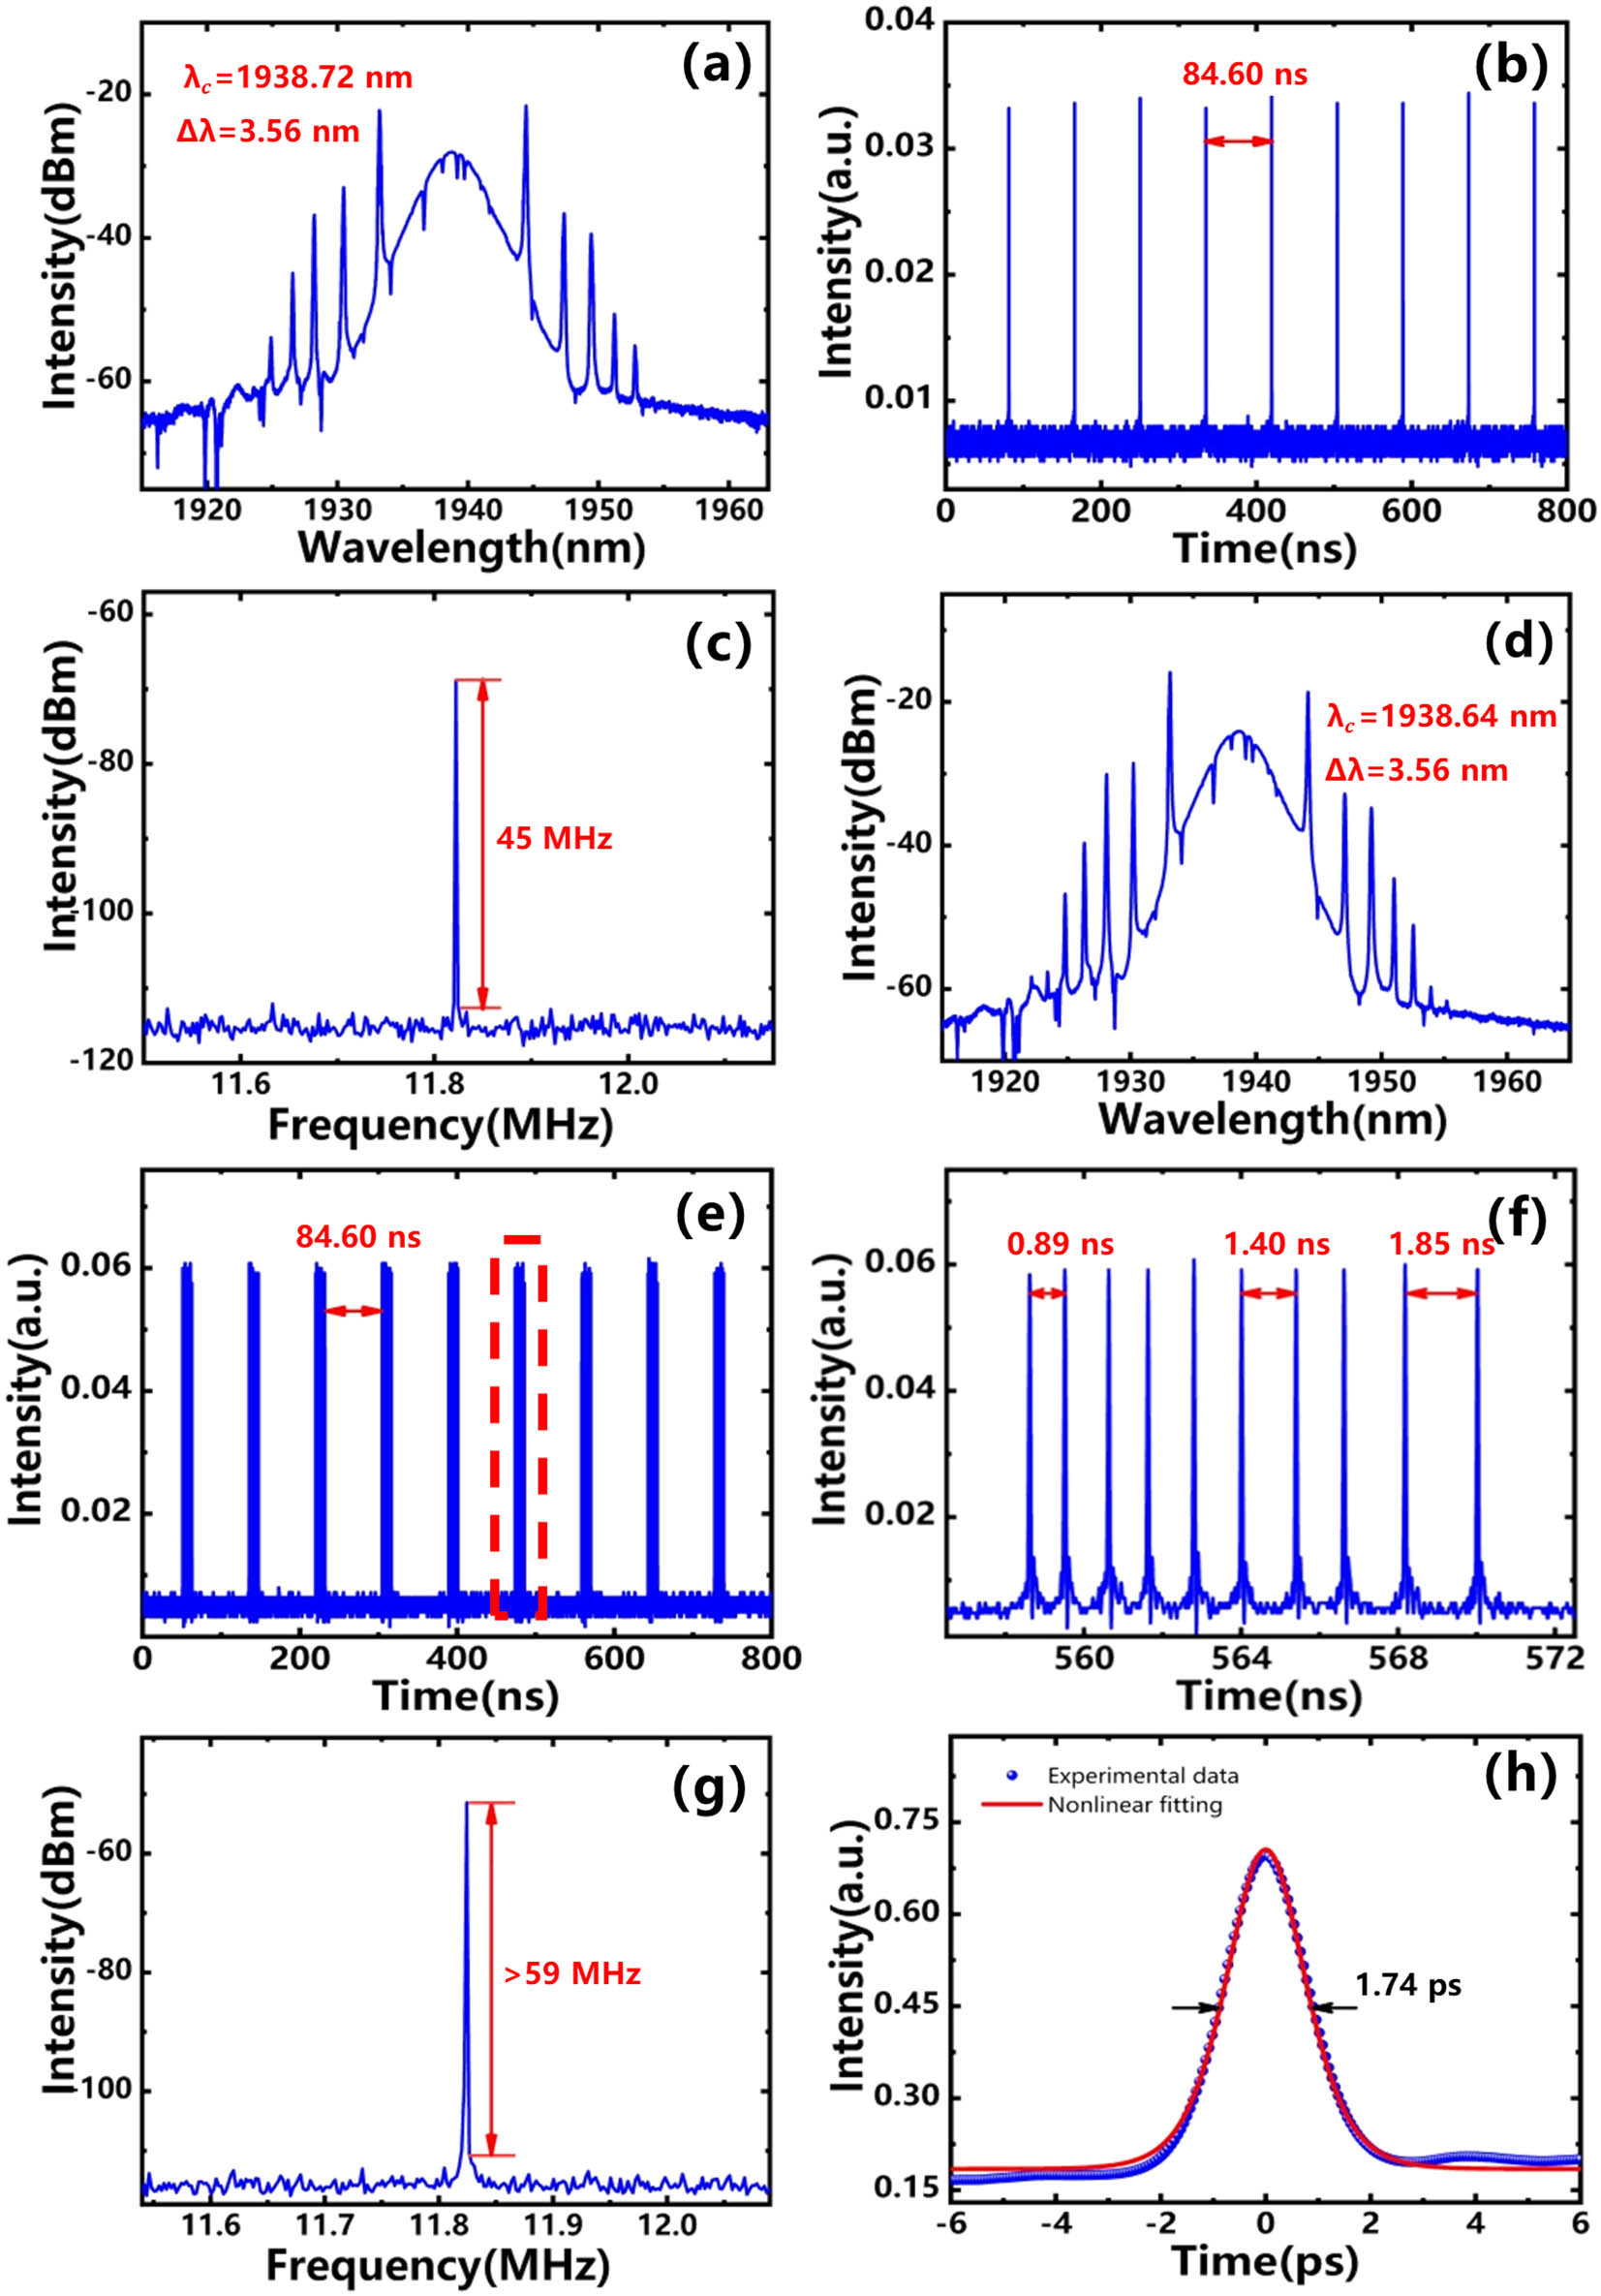 Mode-locking operation of single and multiple solitons at different pump powers. Single soliton at 665 mW: (a) optical spectrum, (b) temporal pulse train, and (c) RF spectrum. Multiple solitons at 925 mW: (d) optical spectrum, (e) temporal pulse trains, (f) close-up of the temporal pulse trains for multiple solitons in (e), (g) RF spectrum with a 1 MHz span, and (h) autocorrelation trace.